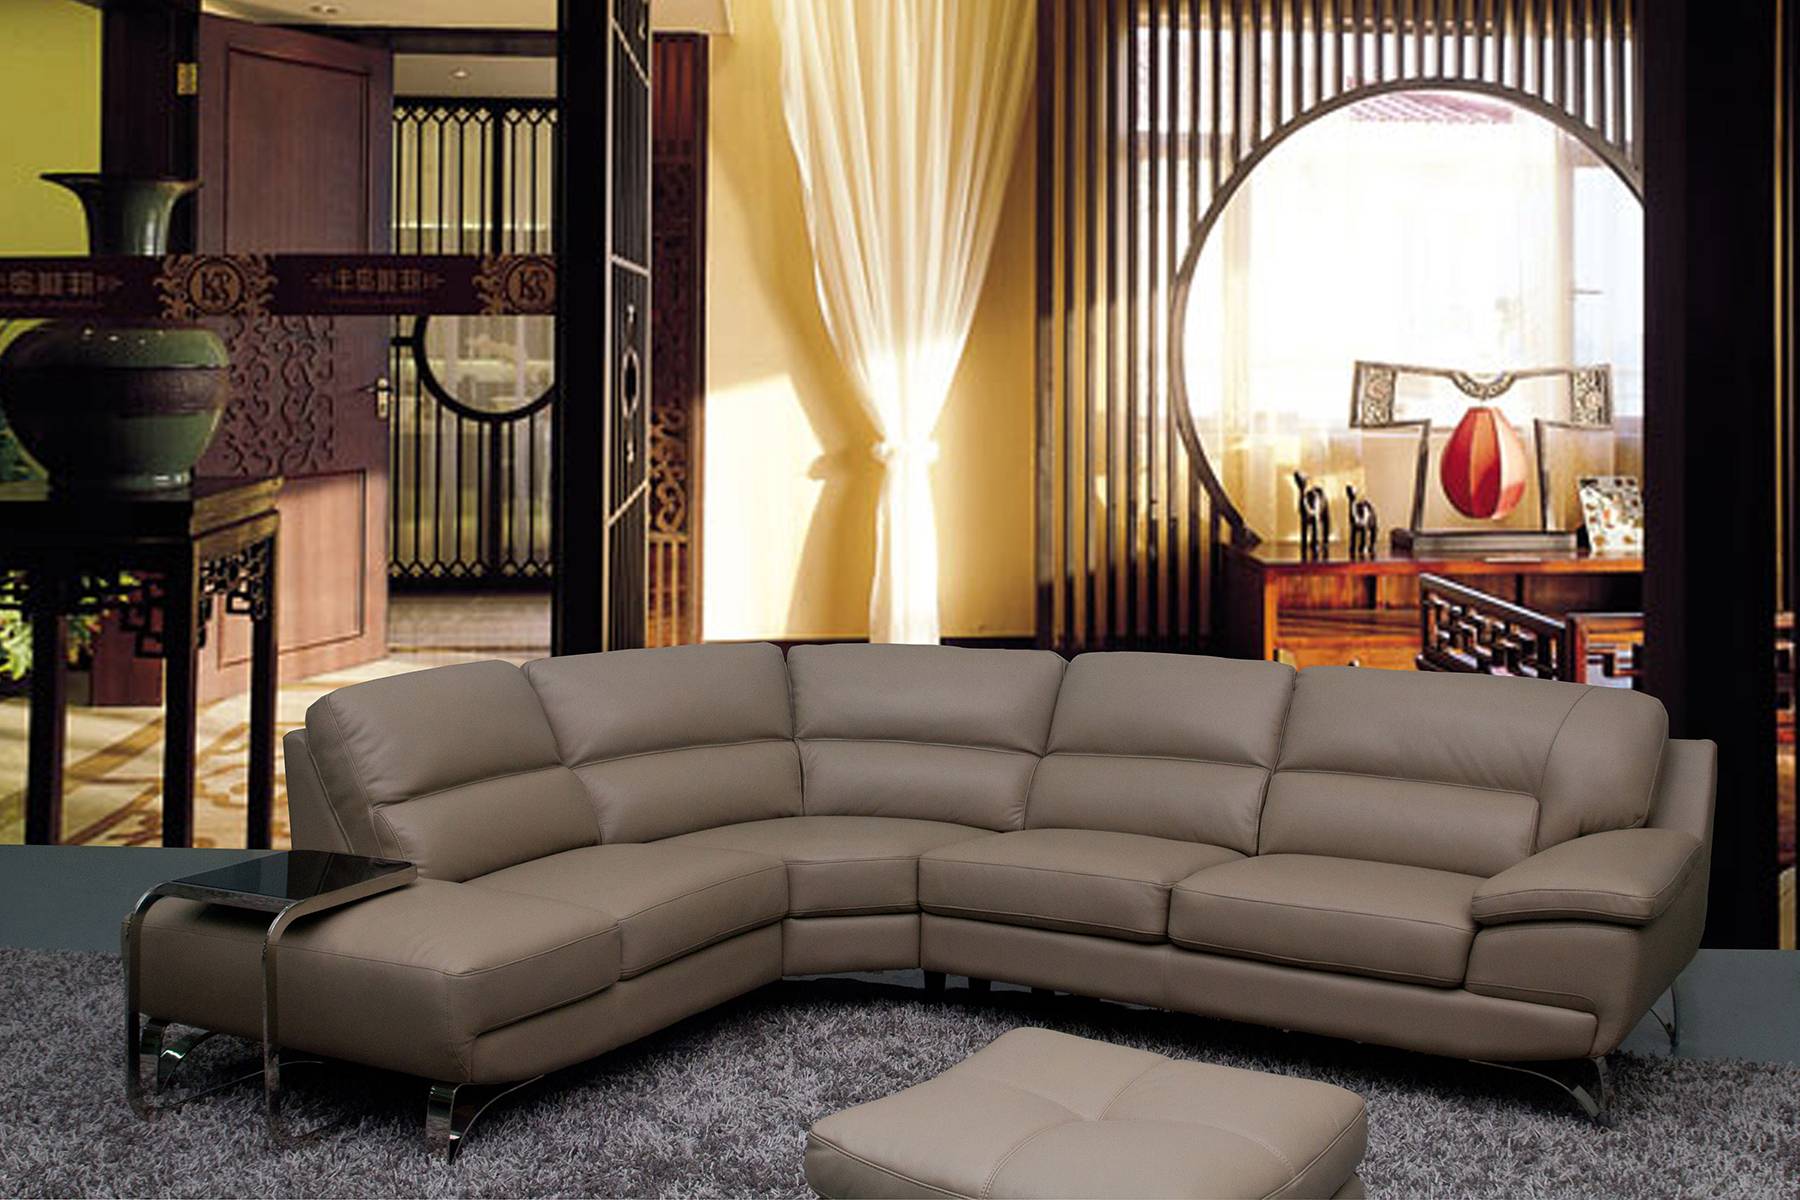 leather sectional sofa dimensions